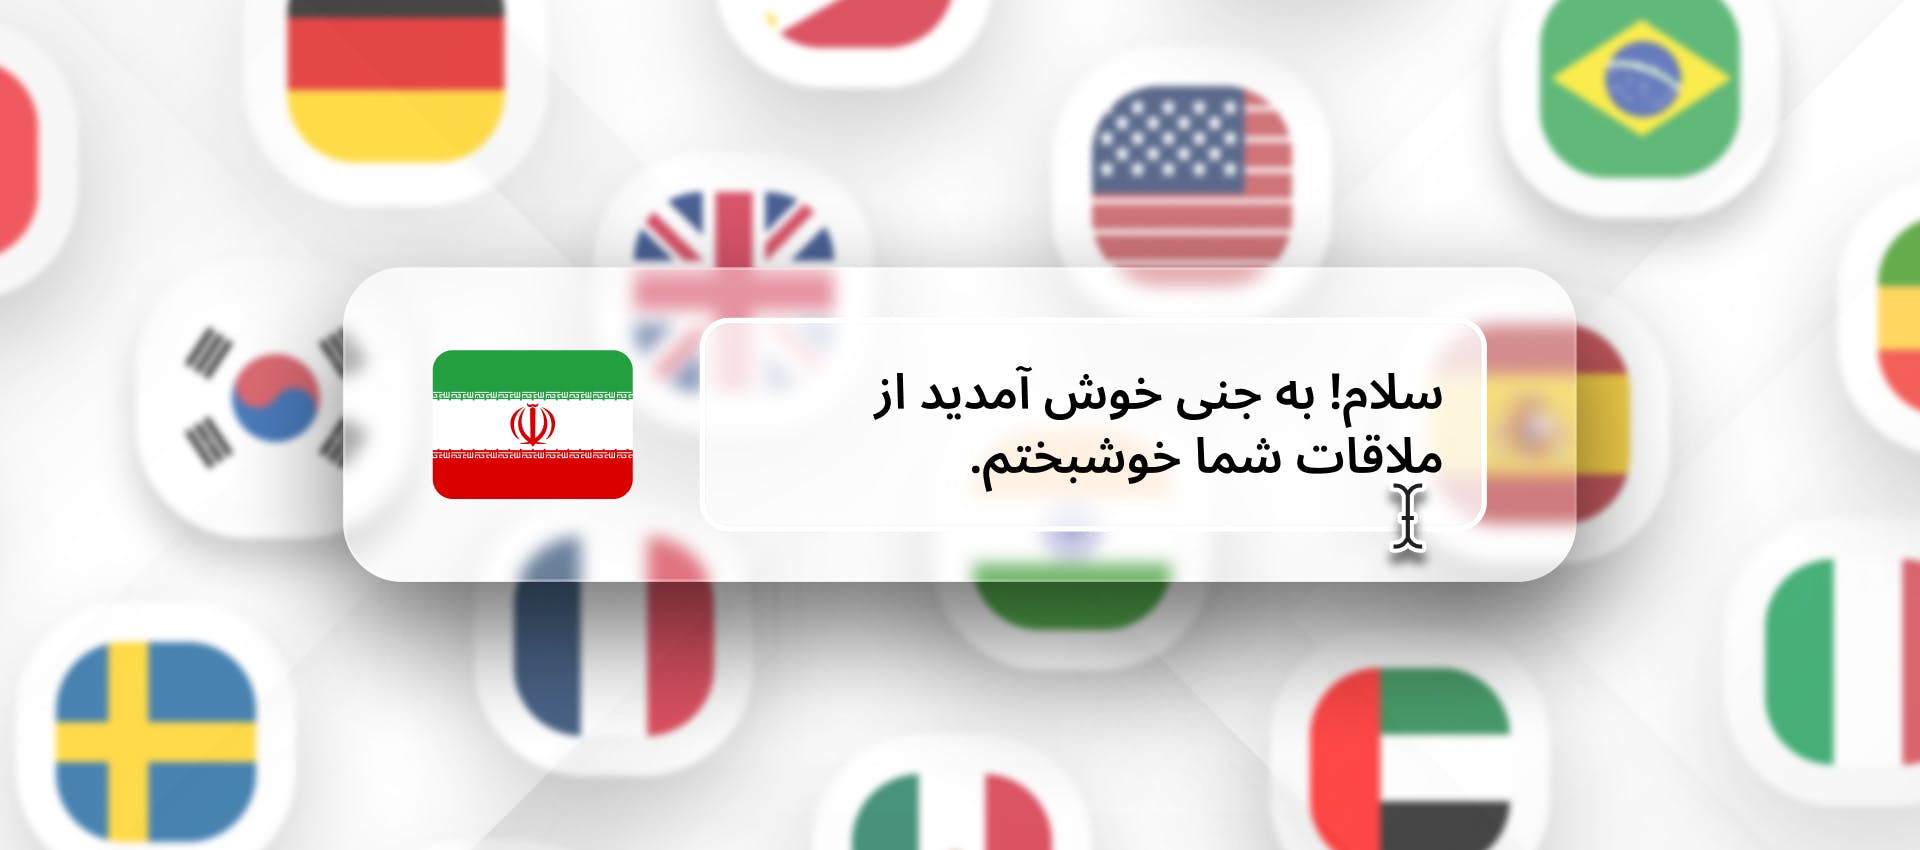 Persian phrase for TTS generation with different flags in the background